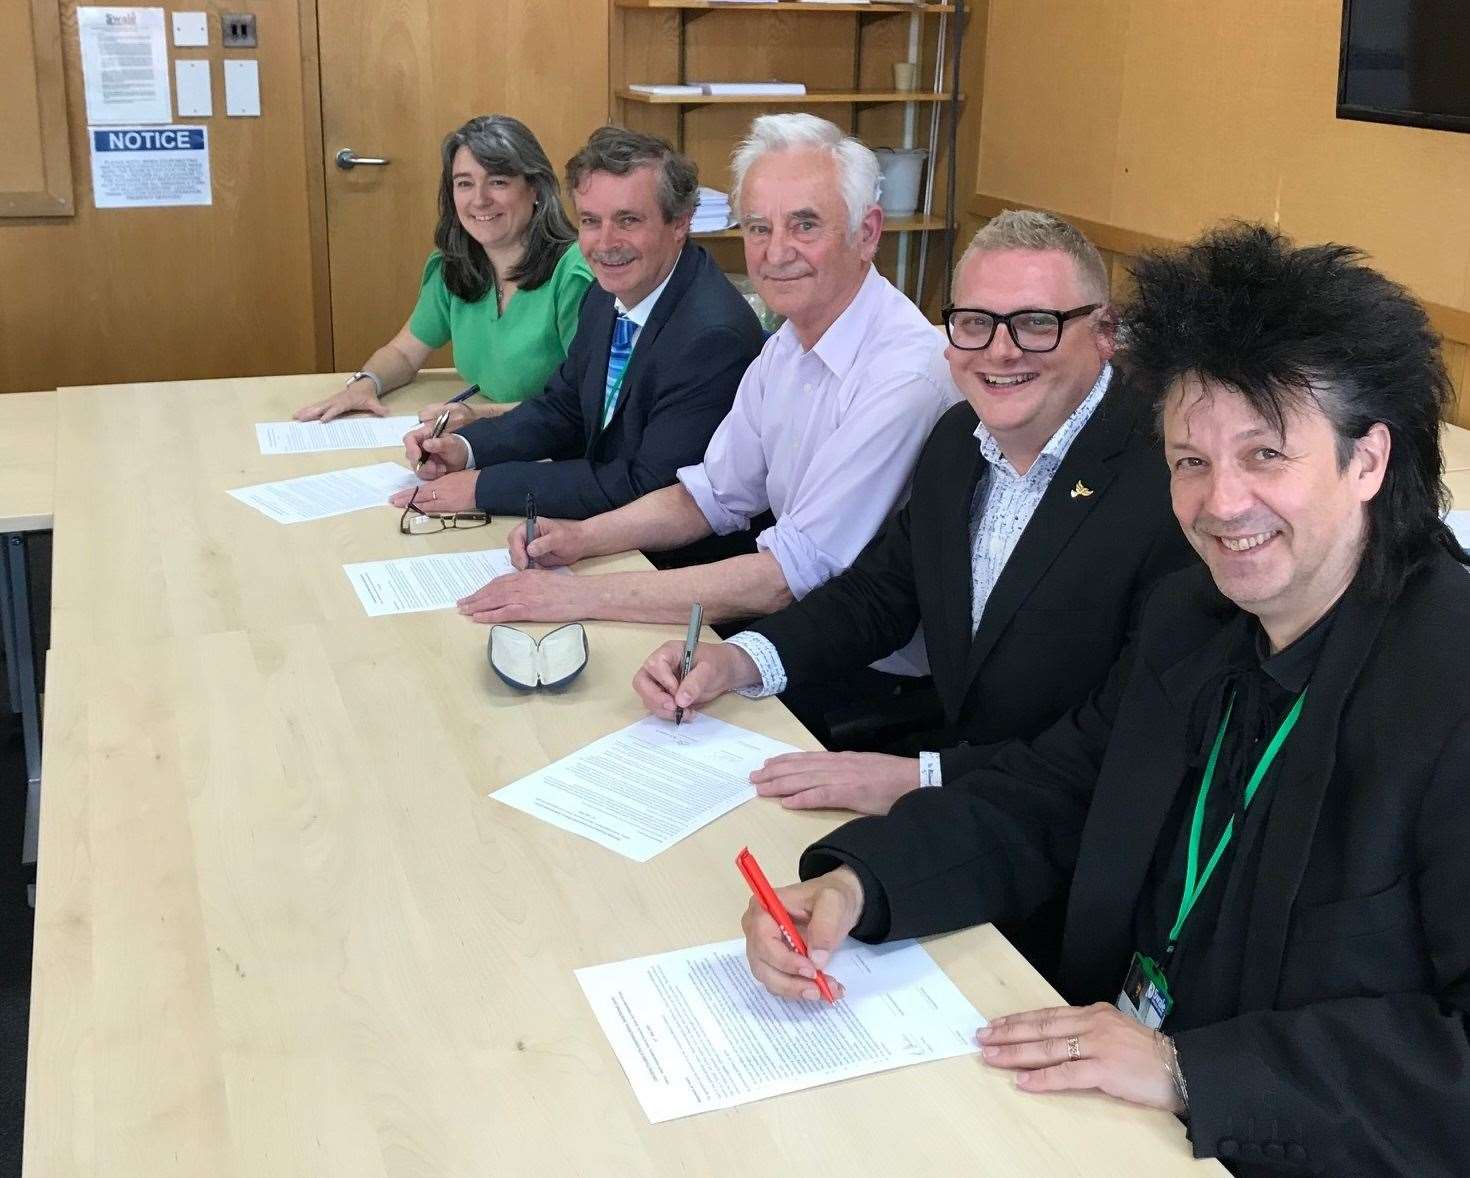 Swale council's new Co-operative Alliance signs a coalition agreement